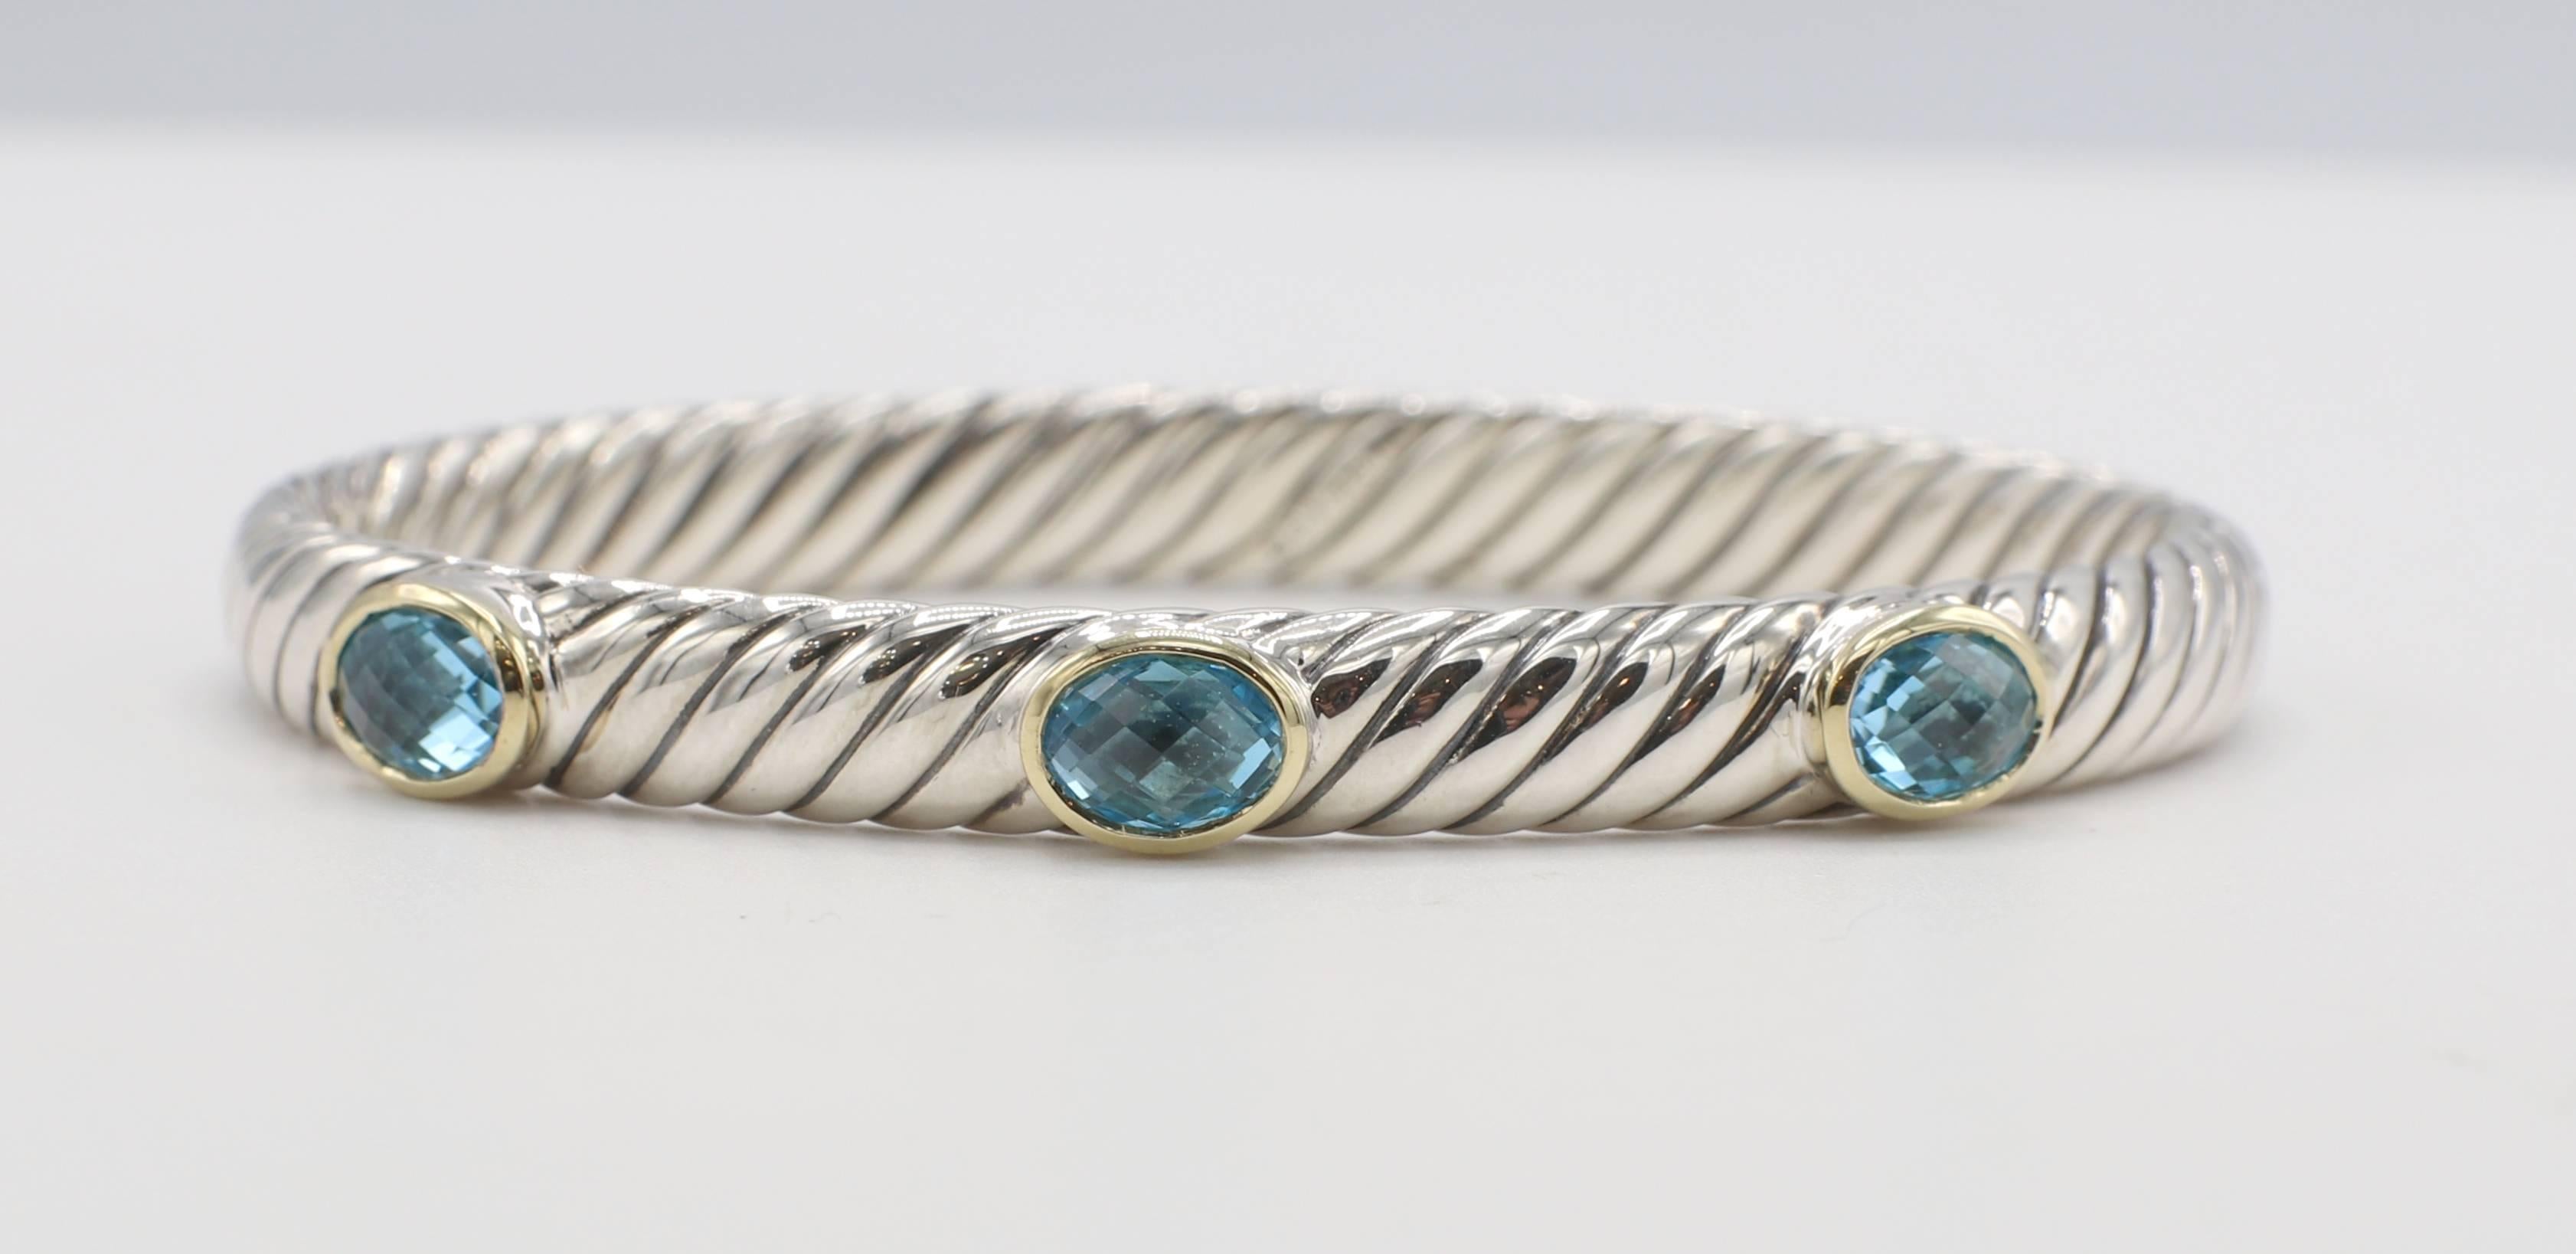 David Yurman Renaissance Sterling Silver Blue Topaz Three Stone Hinged Bangle Bracelet 
Metal: Sterling silver & 18k yellow gold
Weight: 29.29 grams
Width: 6.5mm
Diameter: 60mm
Length: Approx. 6.5 inches 
